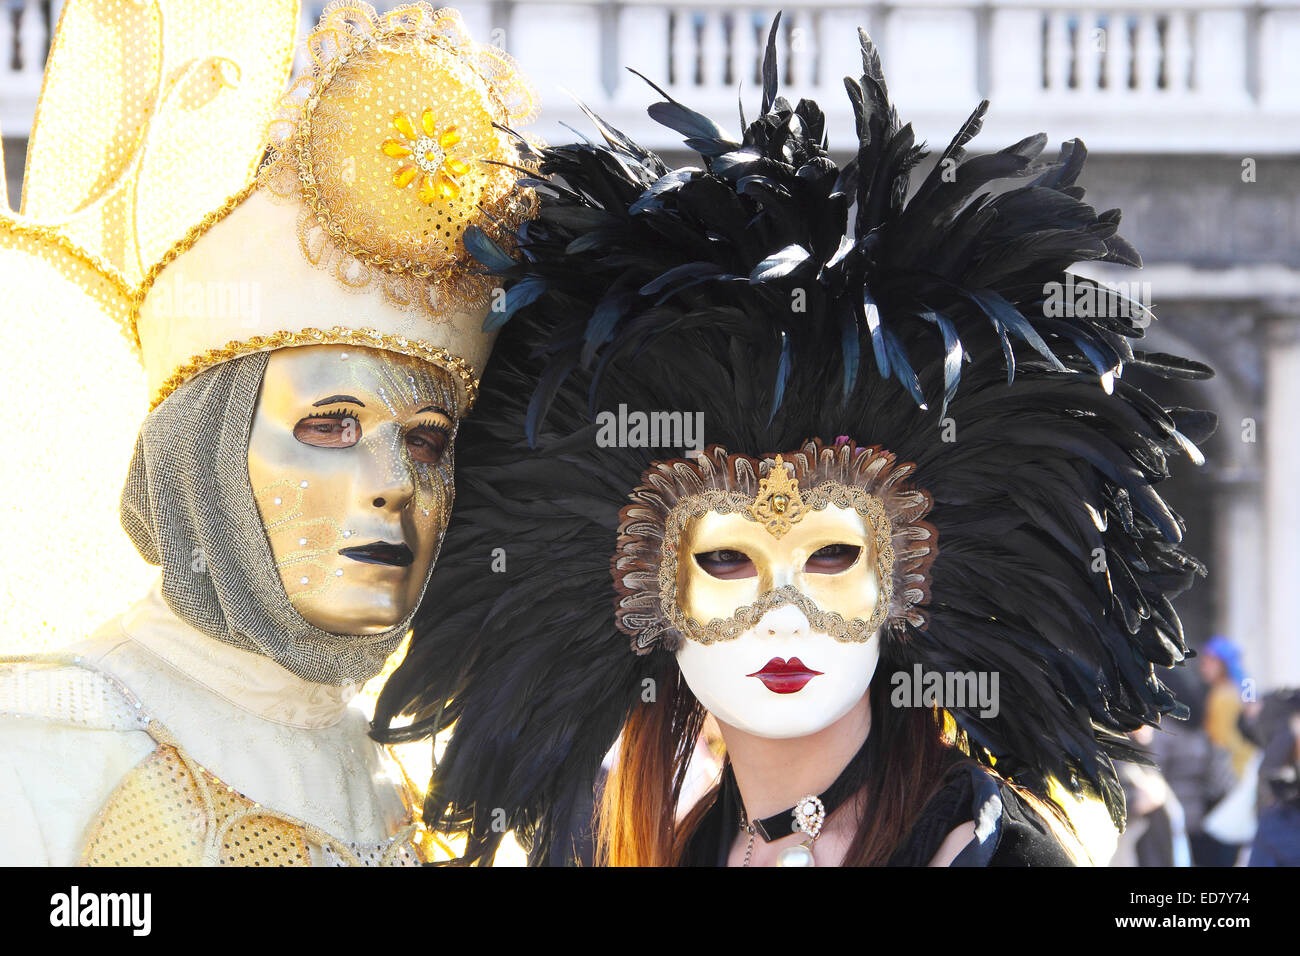 A masked couple exhibited during the traditional Carnival of Venice, Italy (2014 edition) Stock Photo